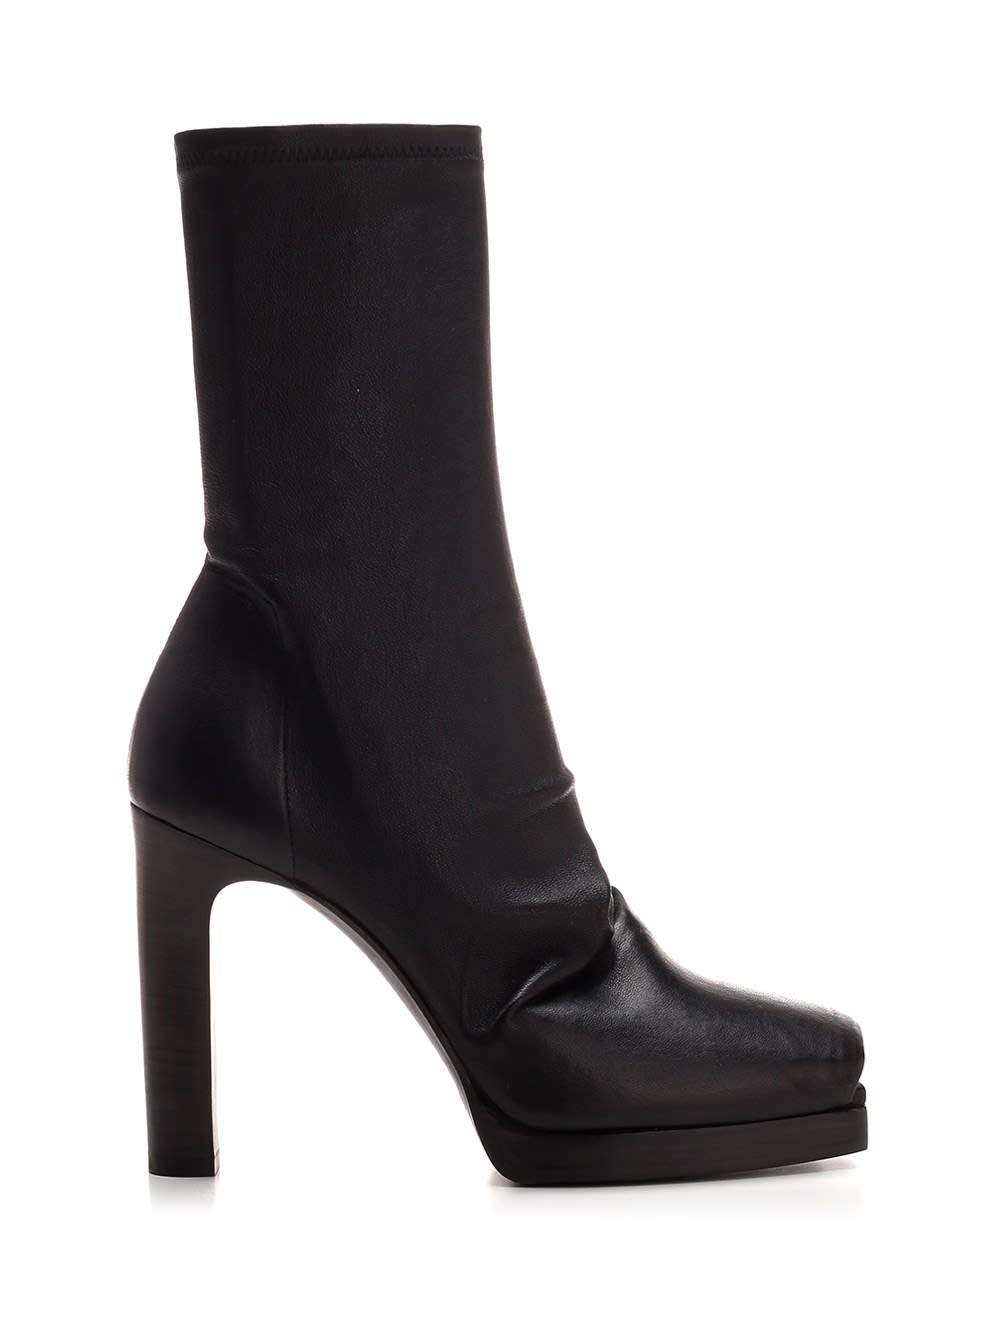 RICK OWENS WEDGE ANKLE BOOT